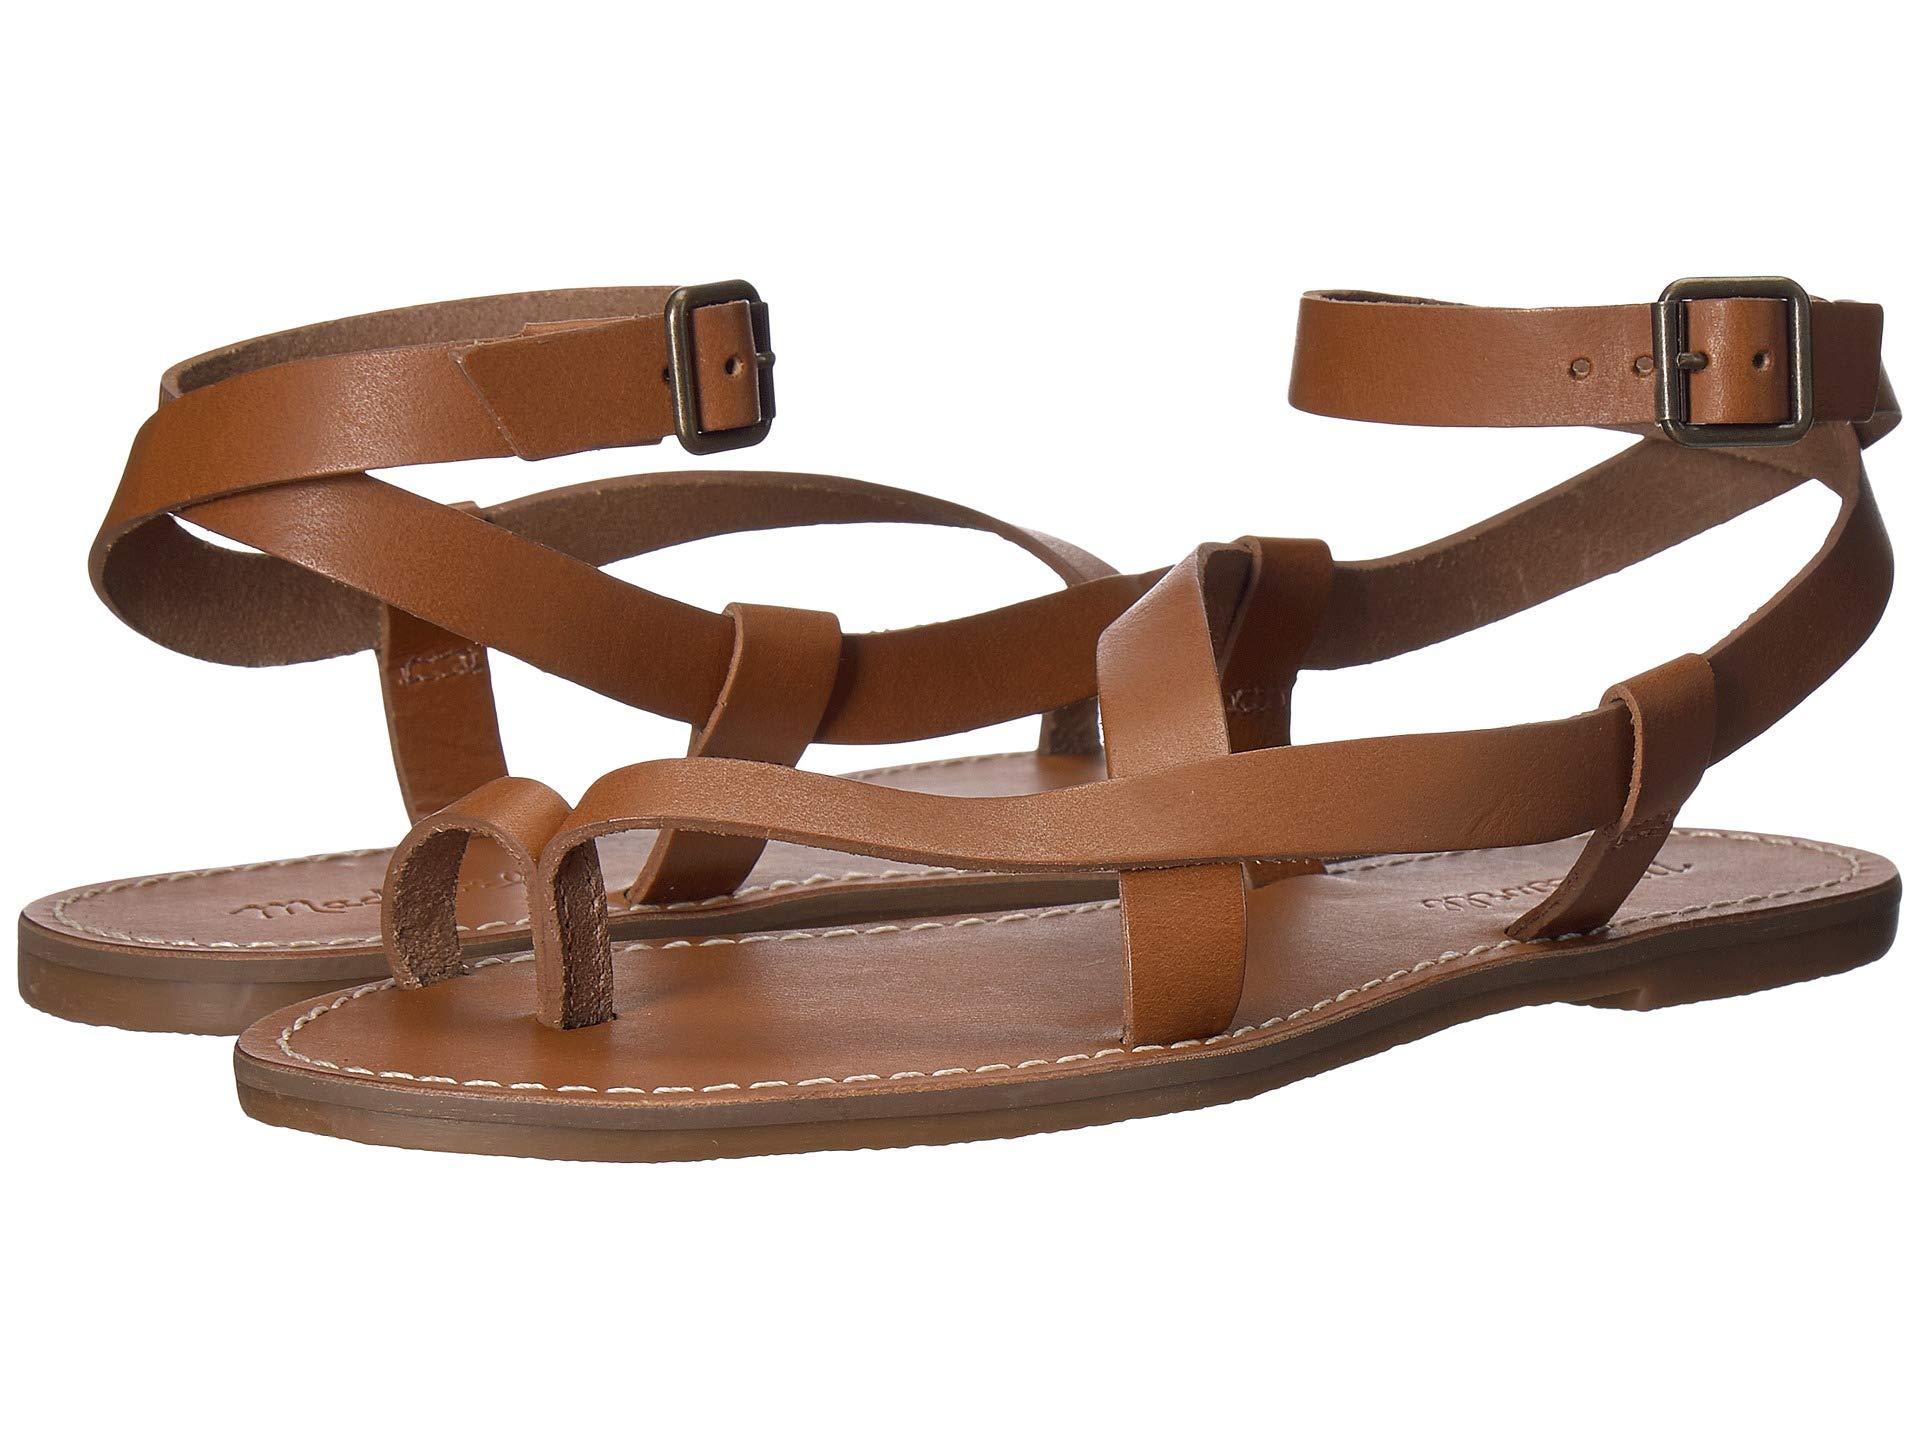 Madewell Leather The Boardwalk Bare Sandals in Brown - Lyst